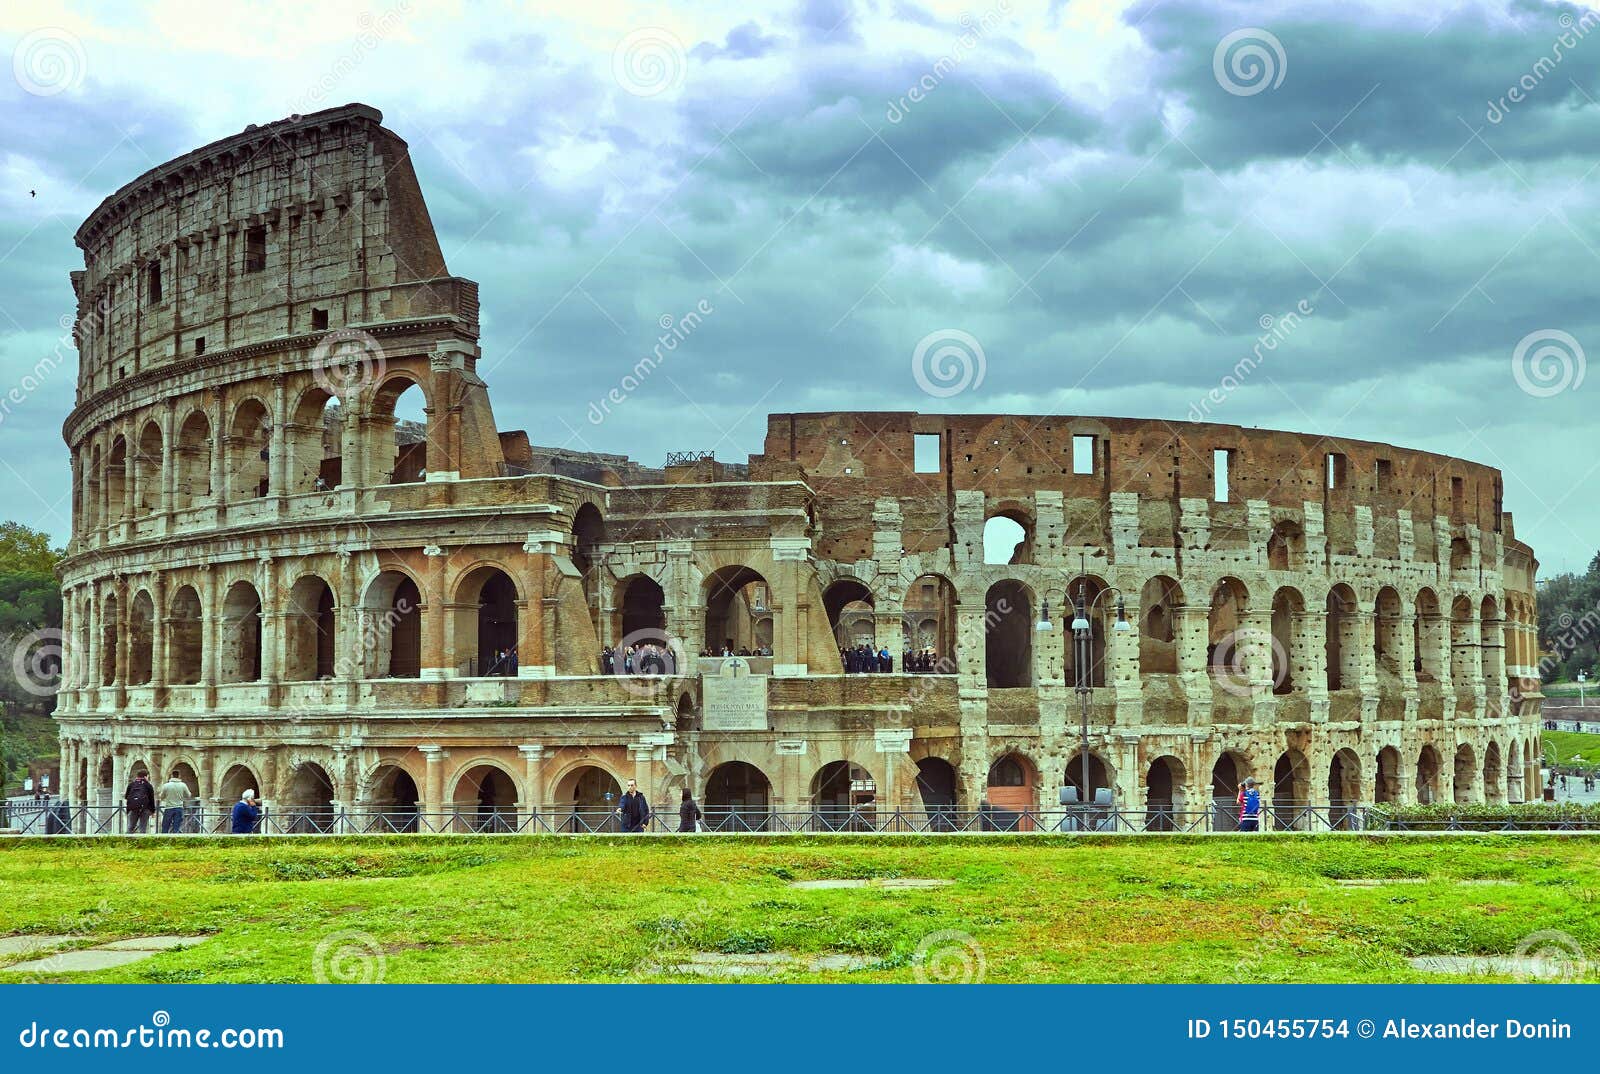 Colosseum In Rome, Italy. Ancient Roman Colosseum Is One ...